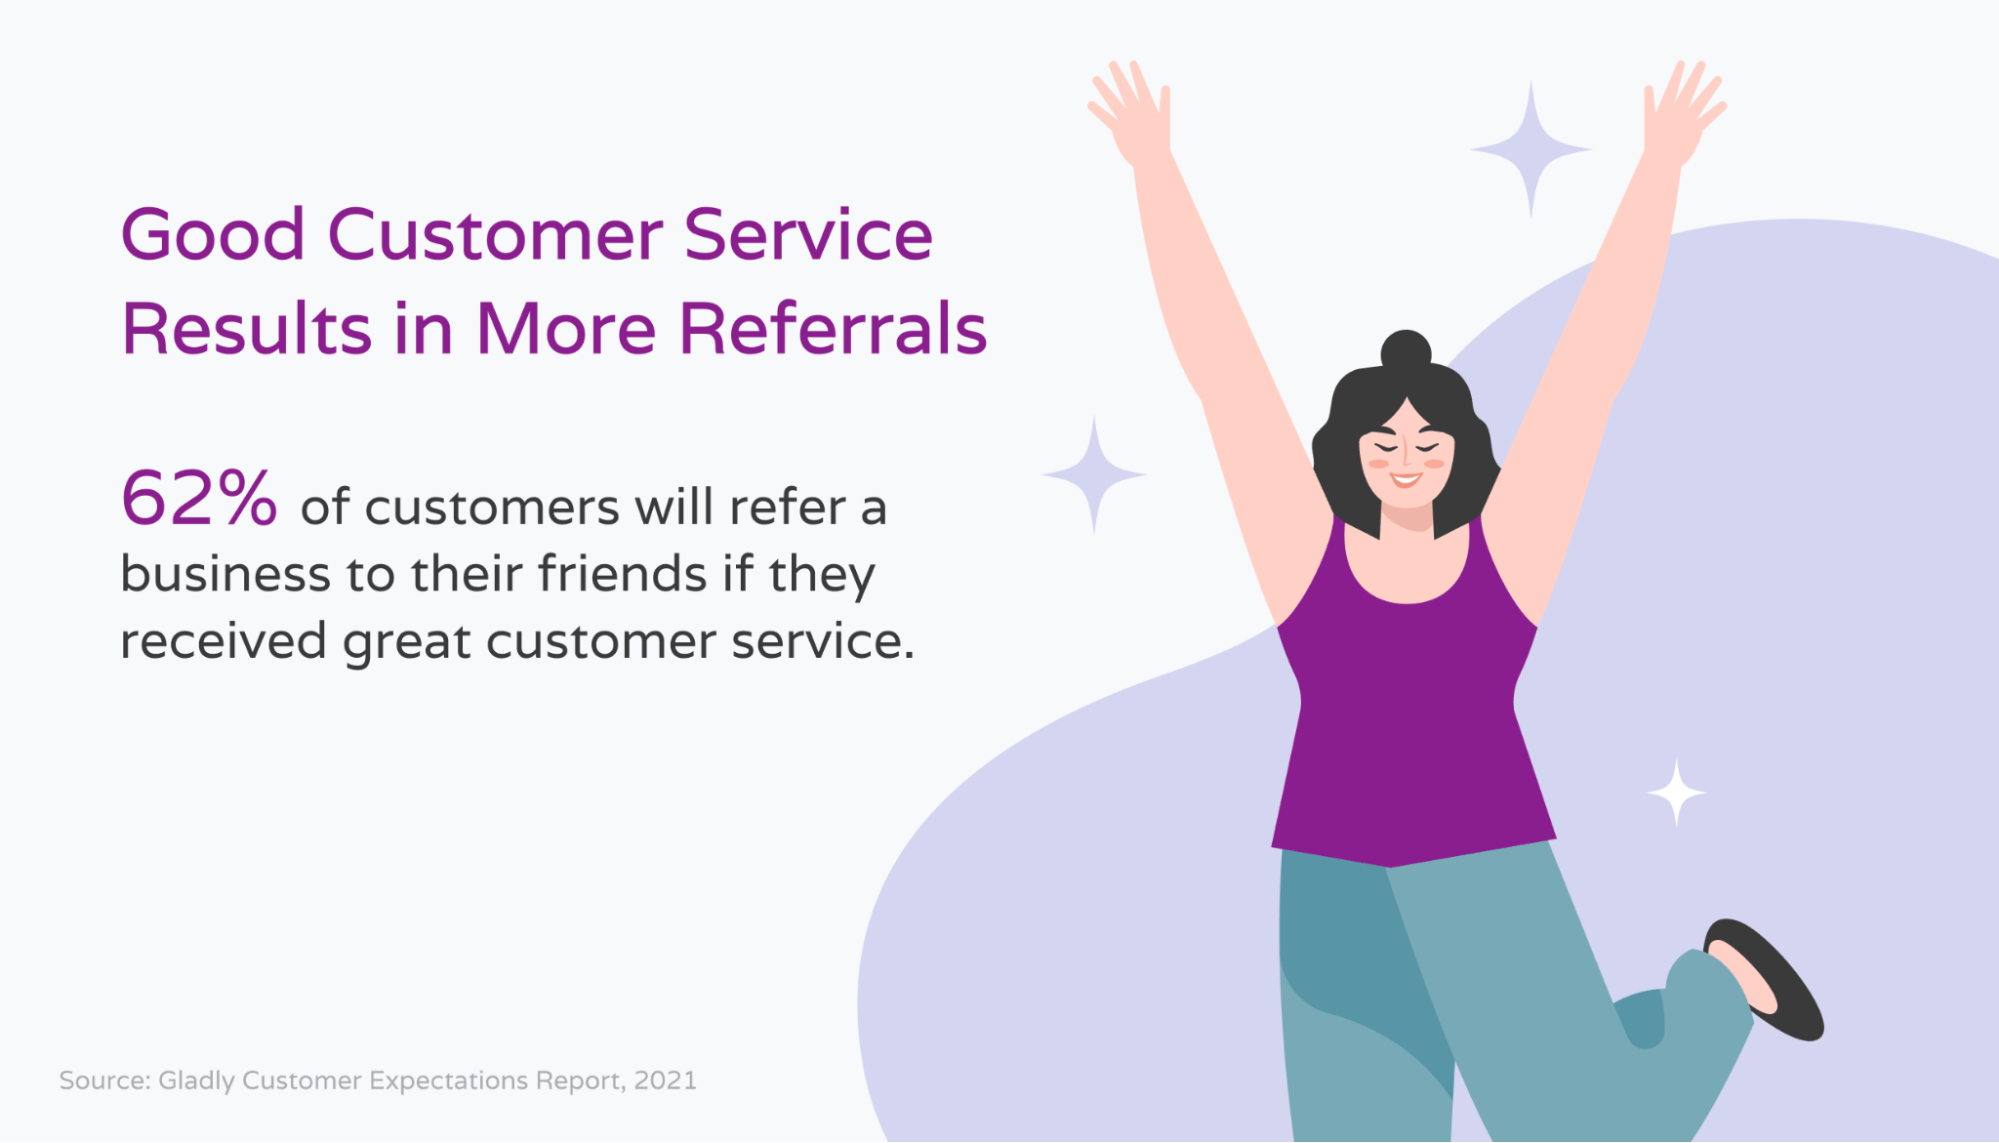 Percentage of customers who would refer their friends due to good customer service